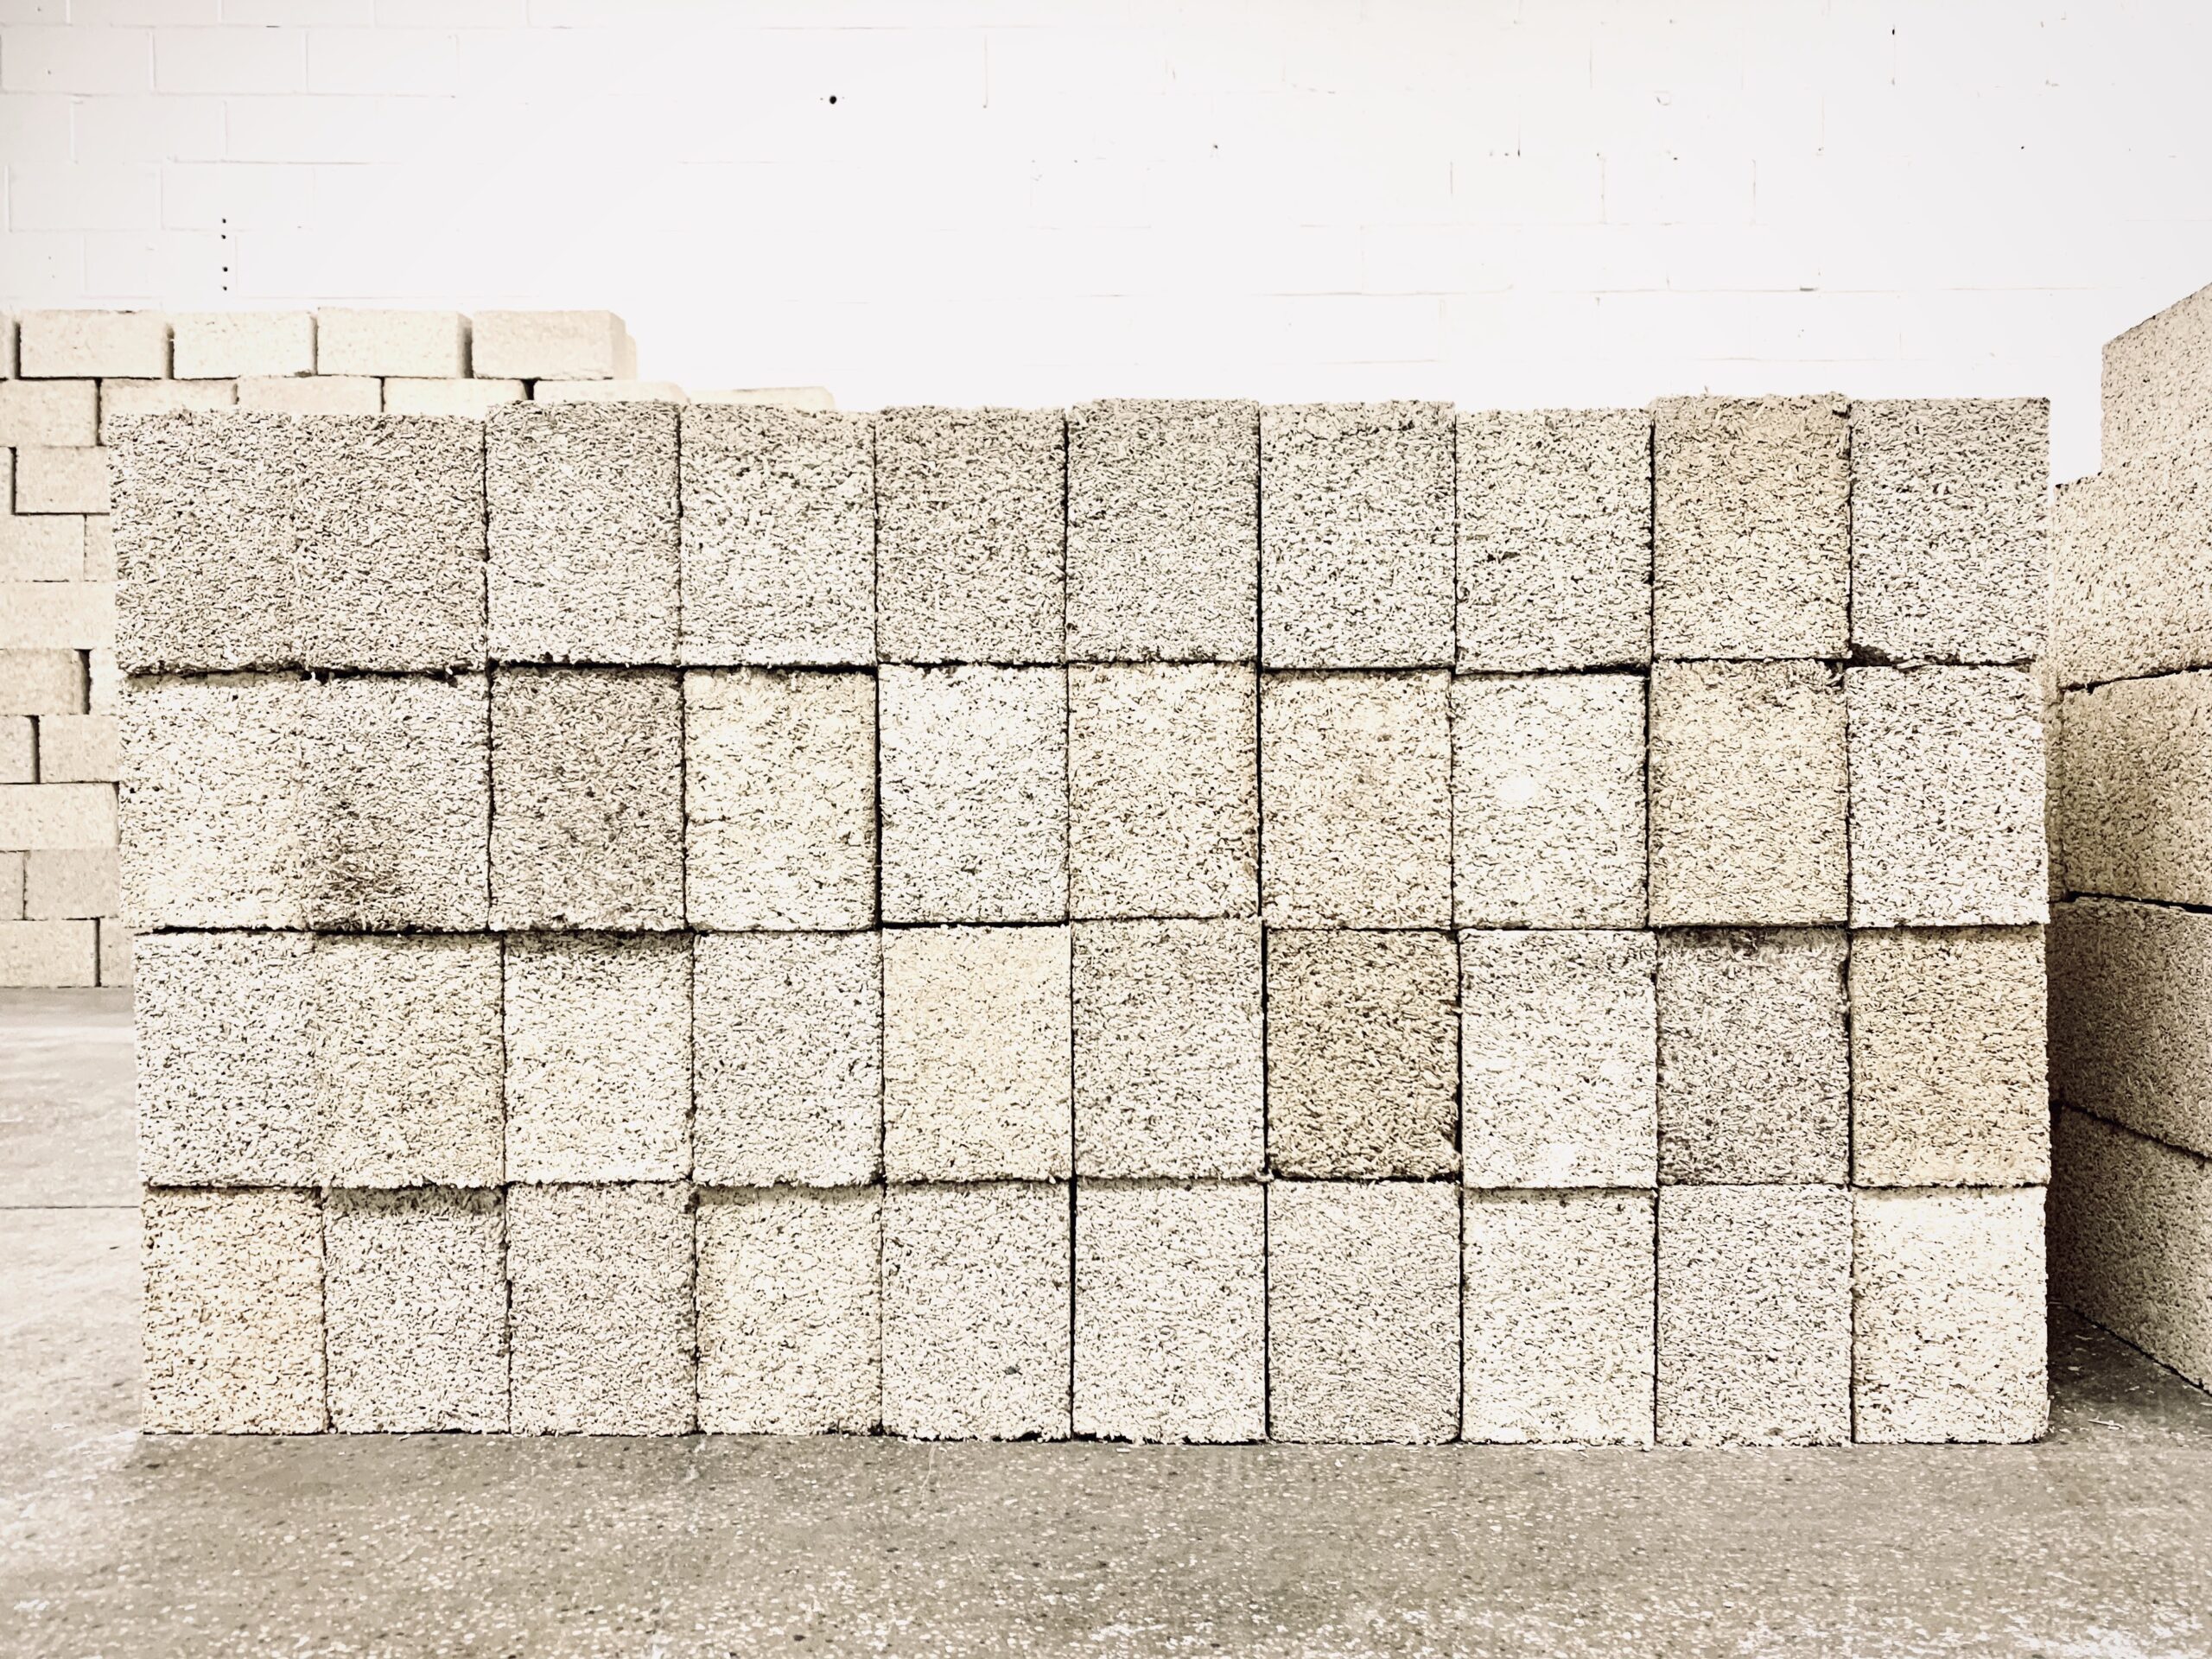 White blocks of concrete-like material stacked in a pile